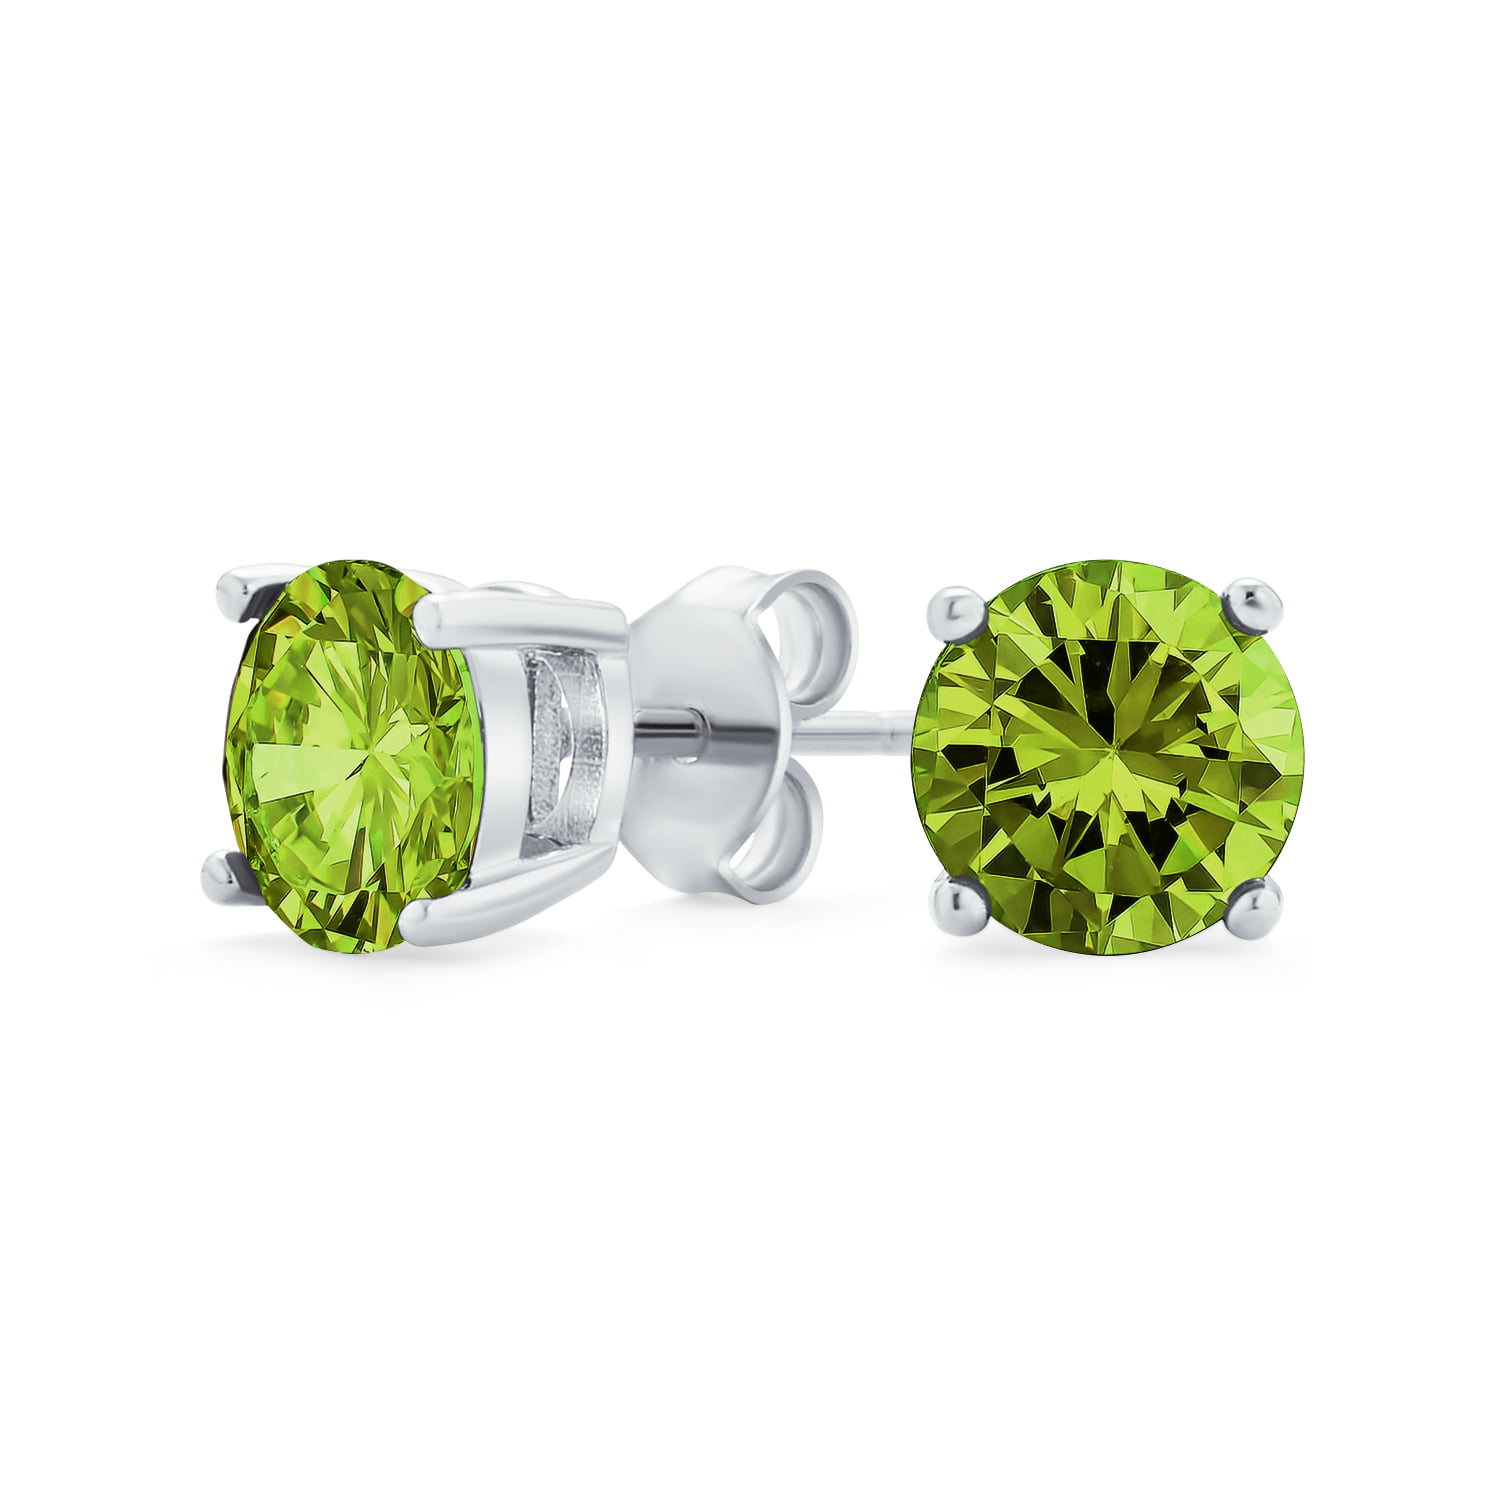 Solitaire Stud Earrings 14K White Gold Over .925 Sterling Silver 6MM SVC-JEWELS 3.00 CT Round Cut Peridot